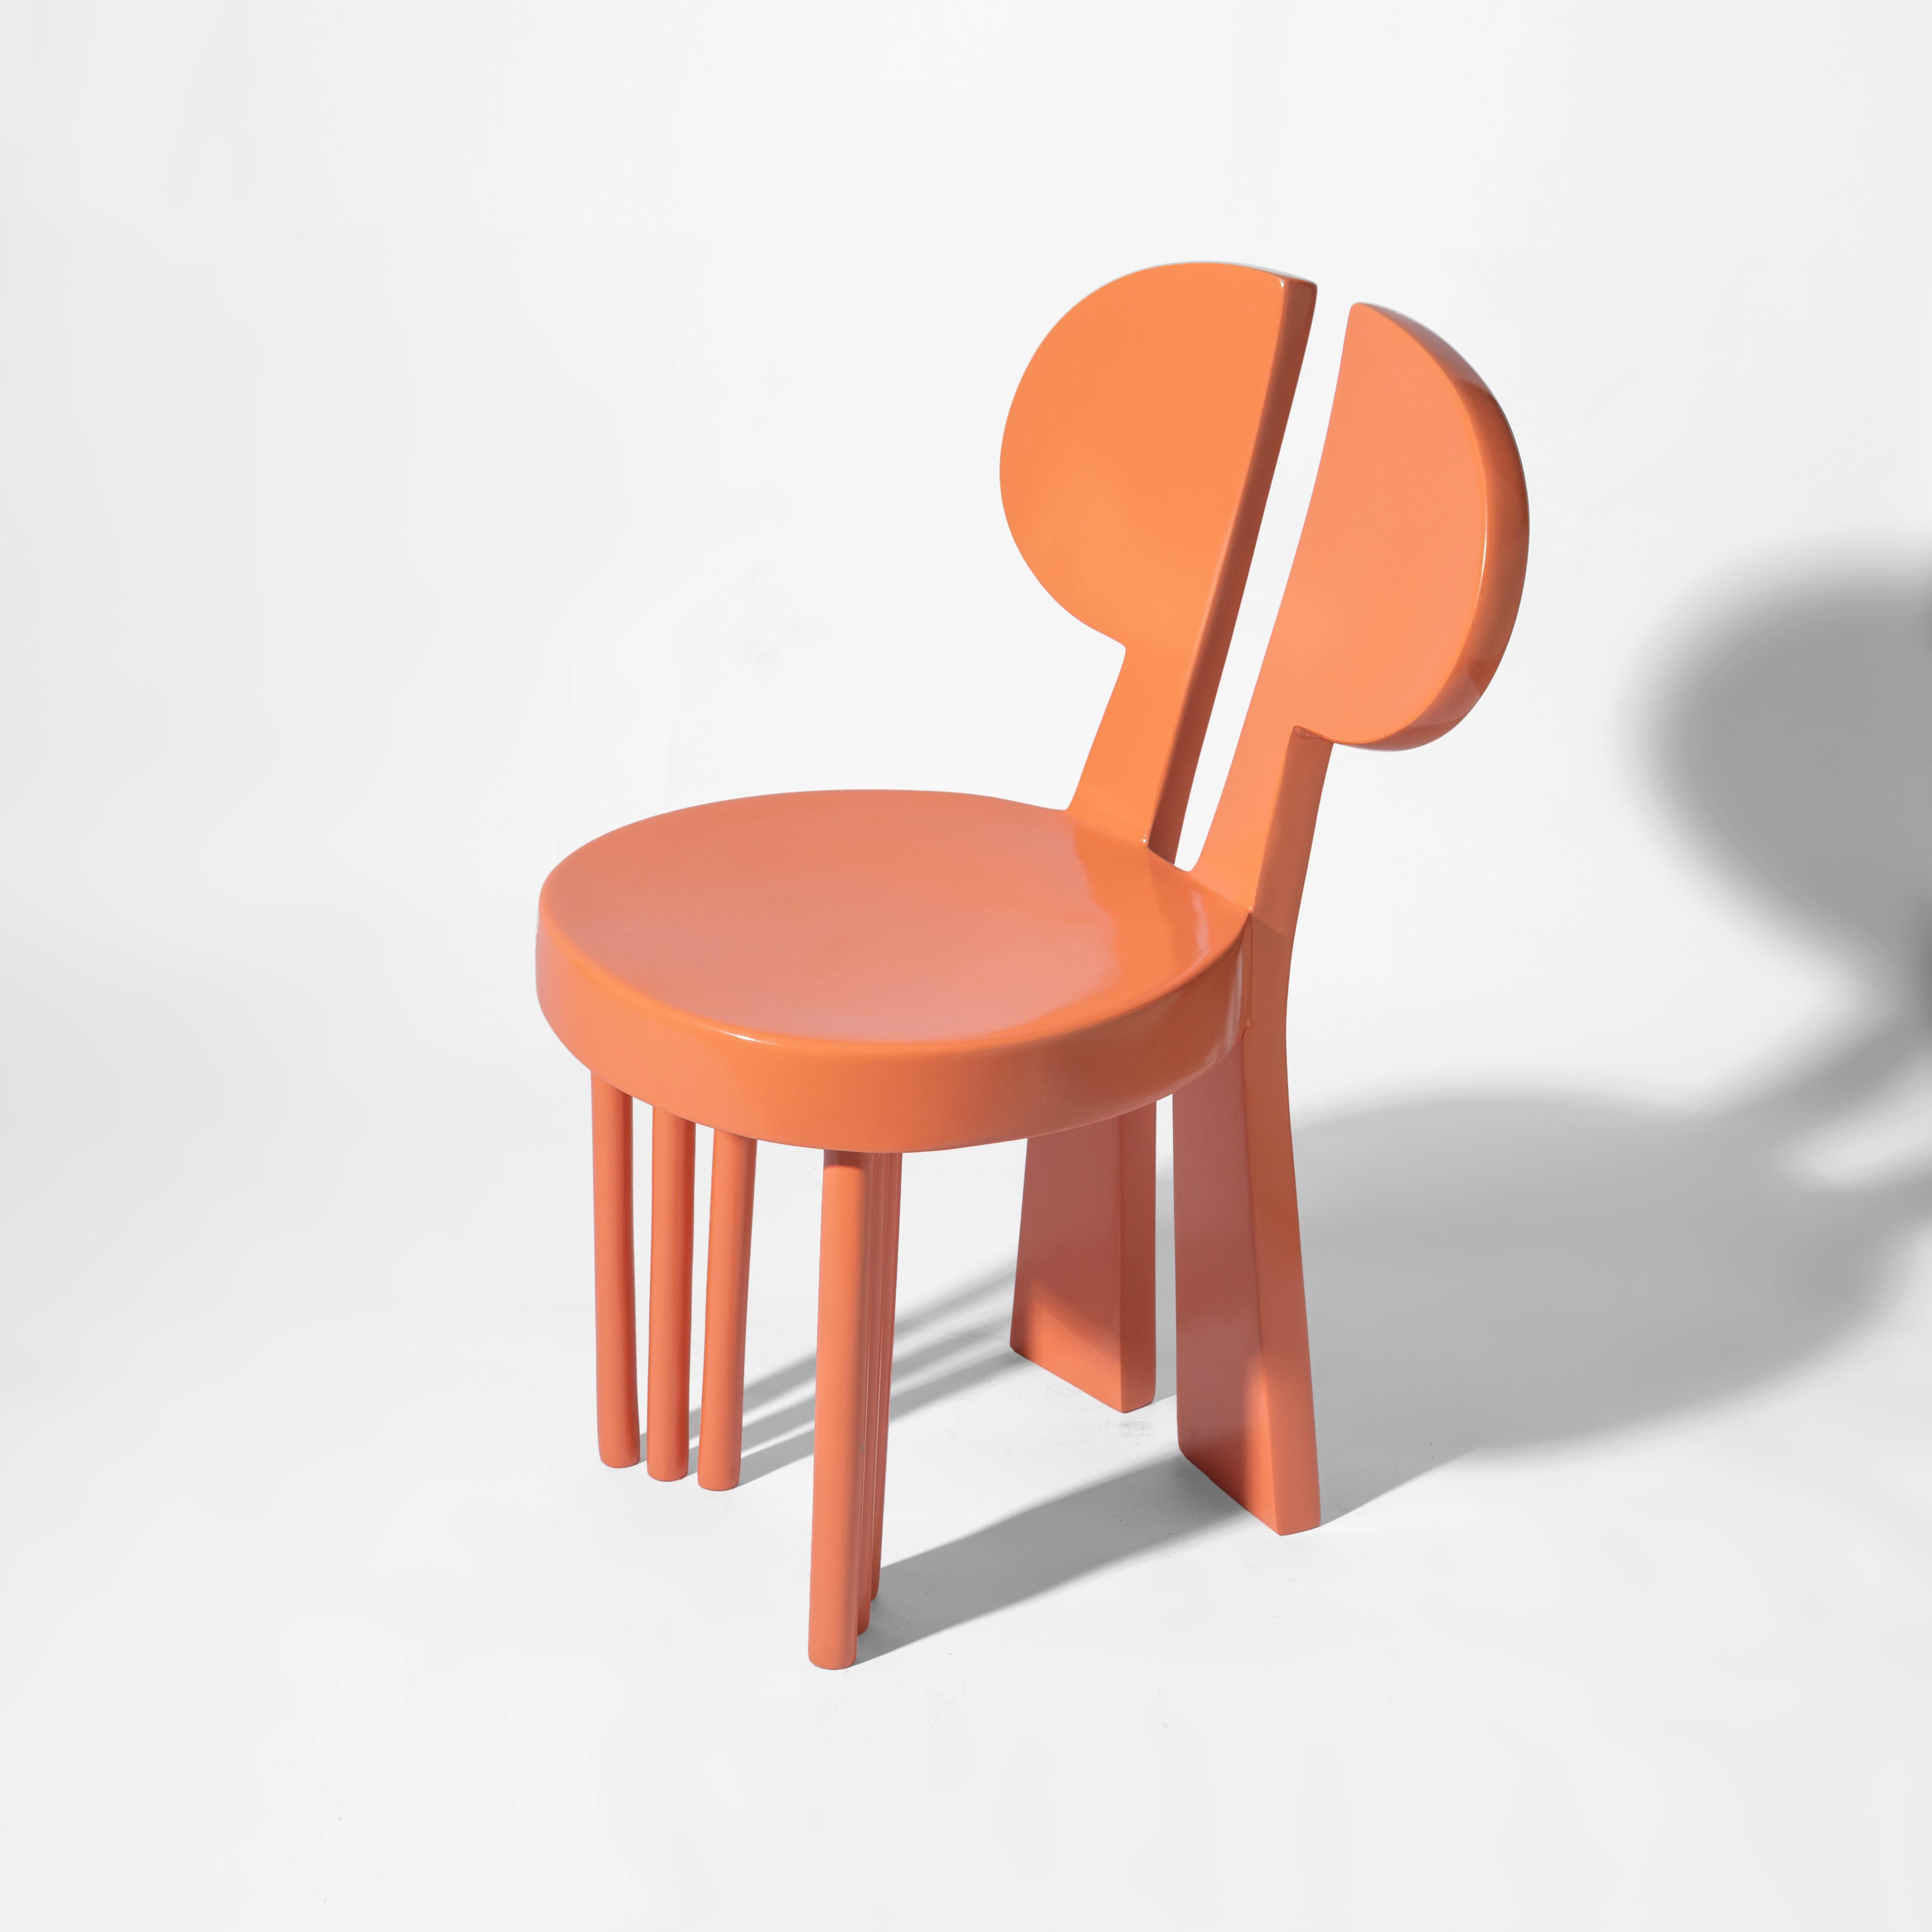 Orange weather-resistant fiberglass dining chair with bold design.

The Ibex chair draws its bold design from the majestic Nubian Ibex, these rare creatures symbolic of the resilient yet delightful natives. The brazen backrest curves are